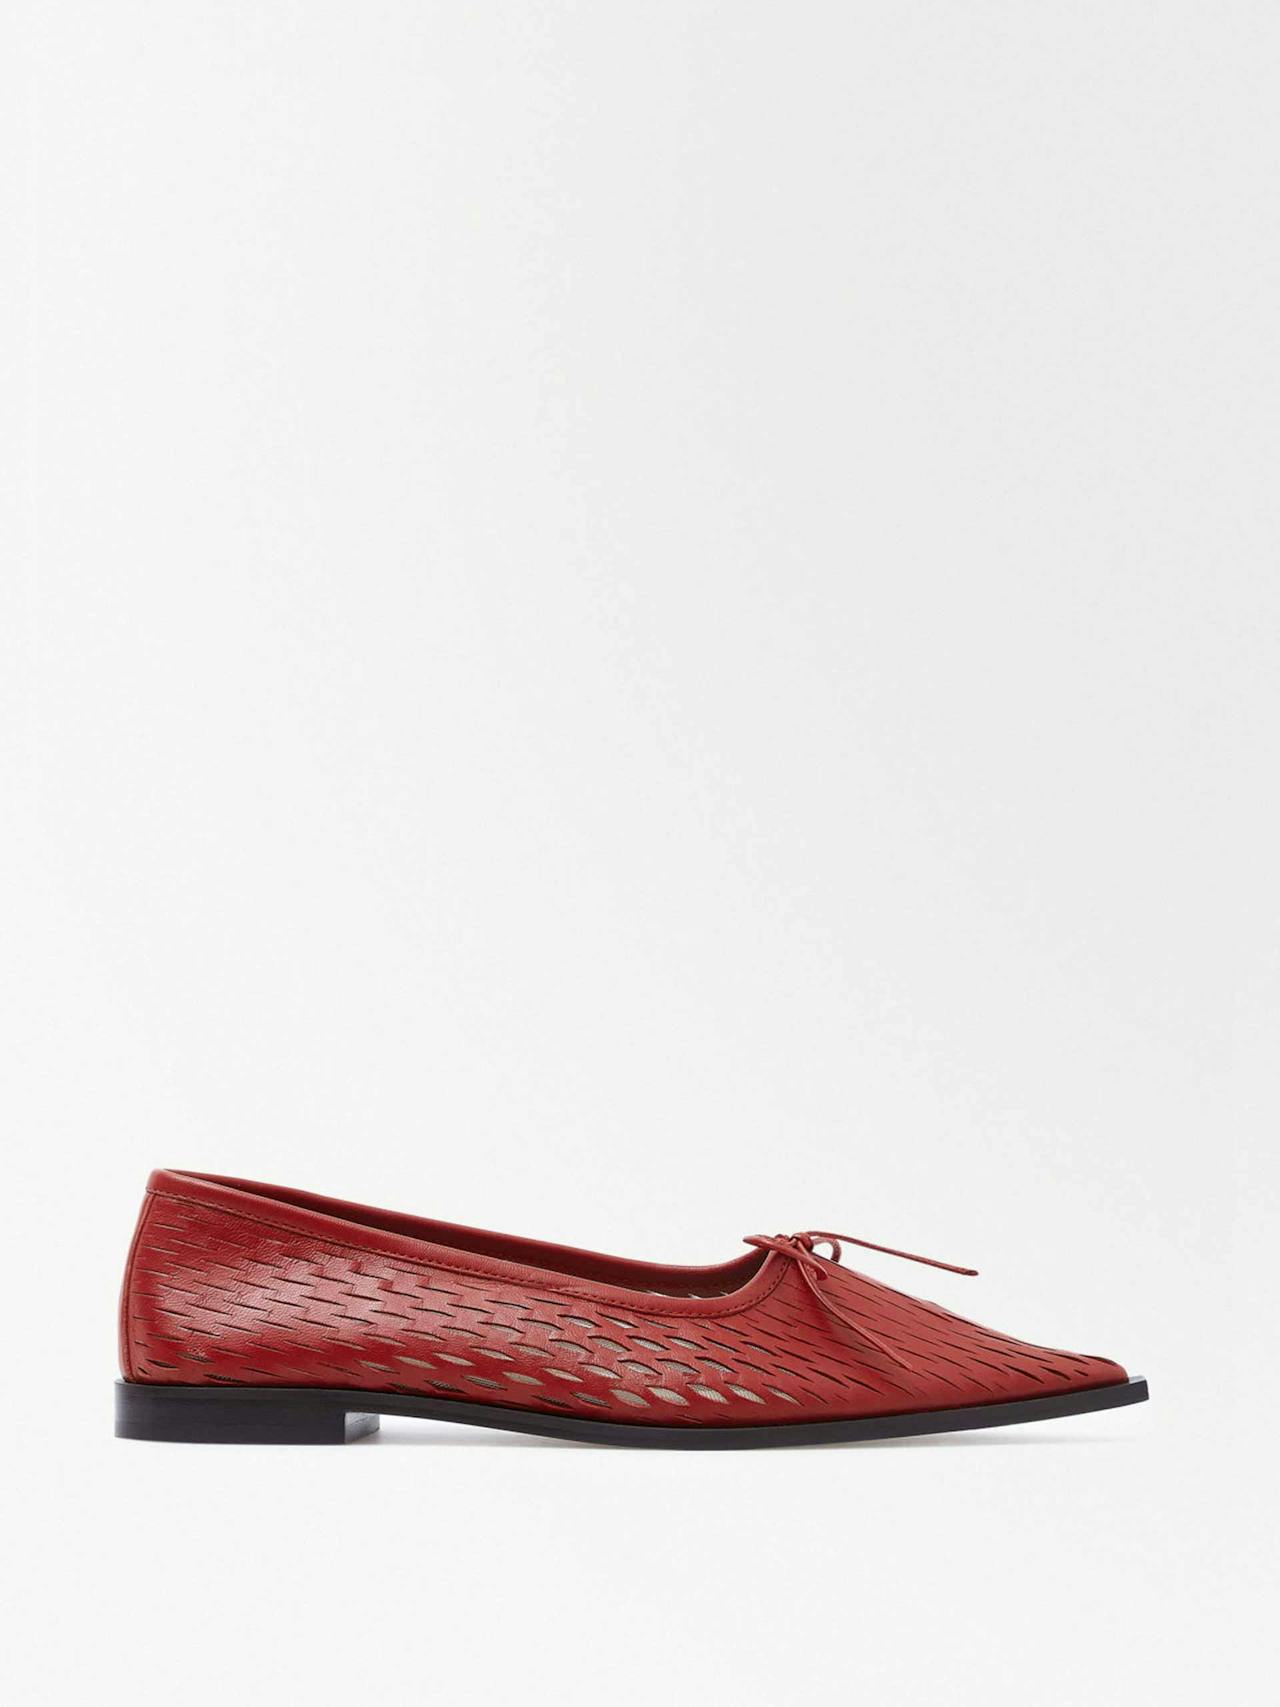 The perforated leather ballet flats